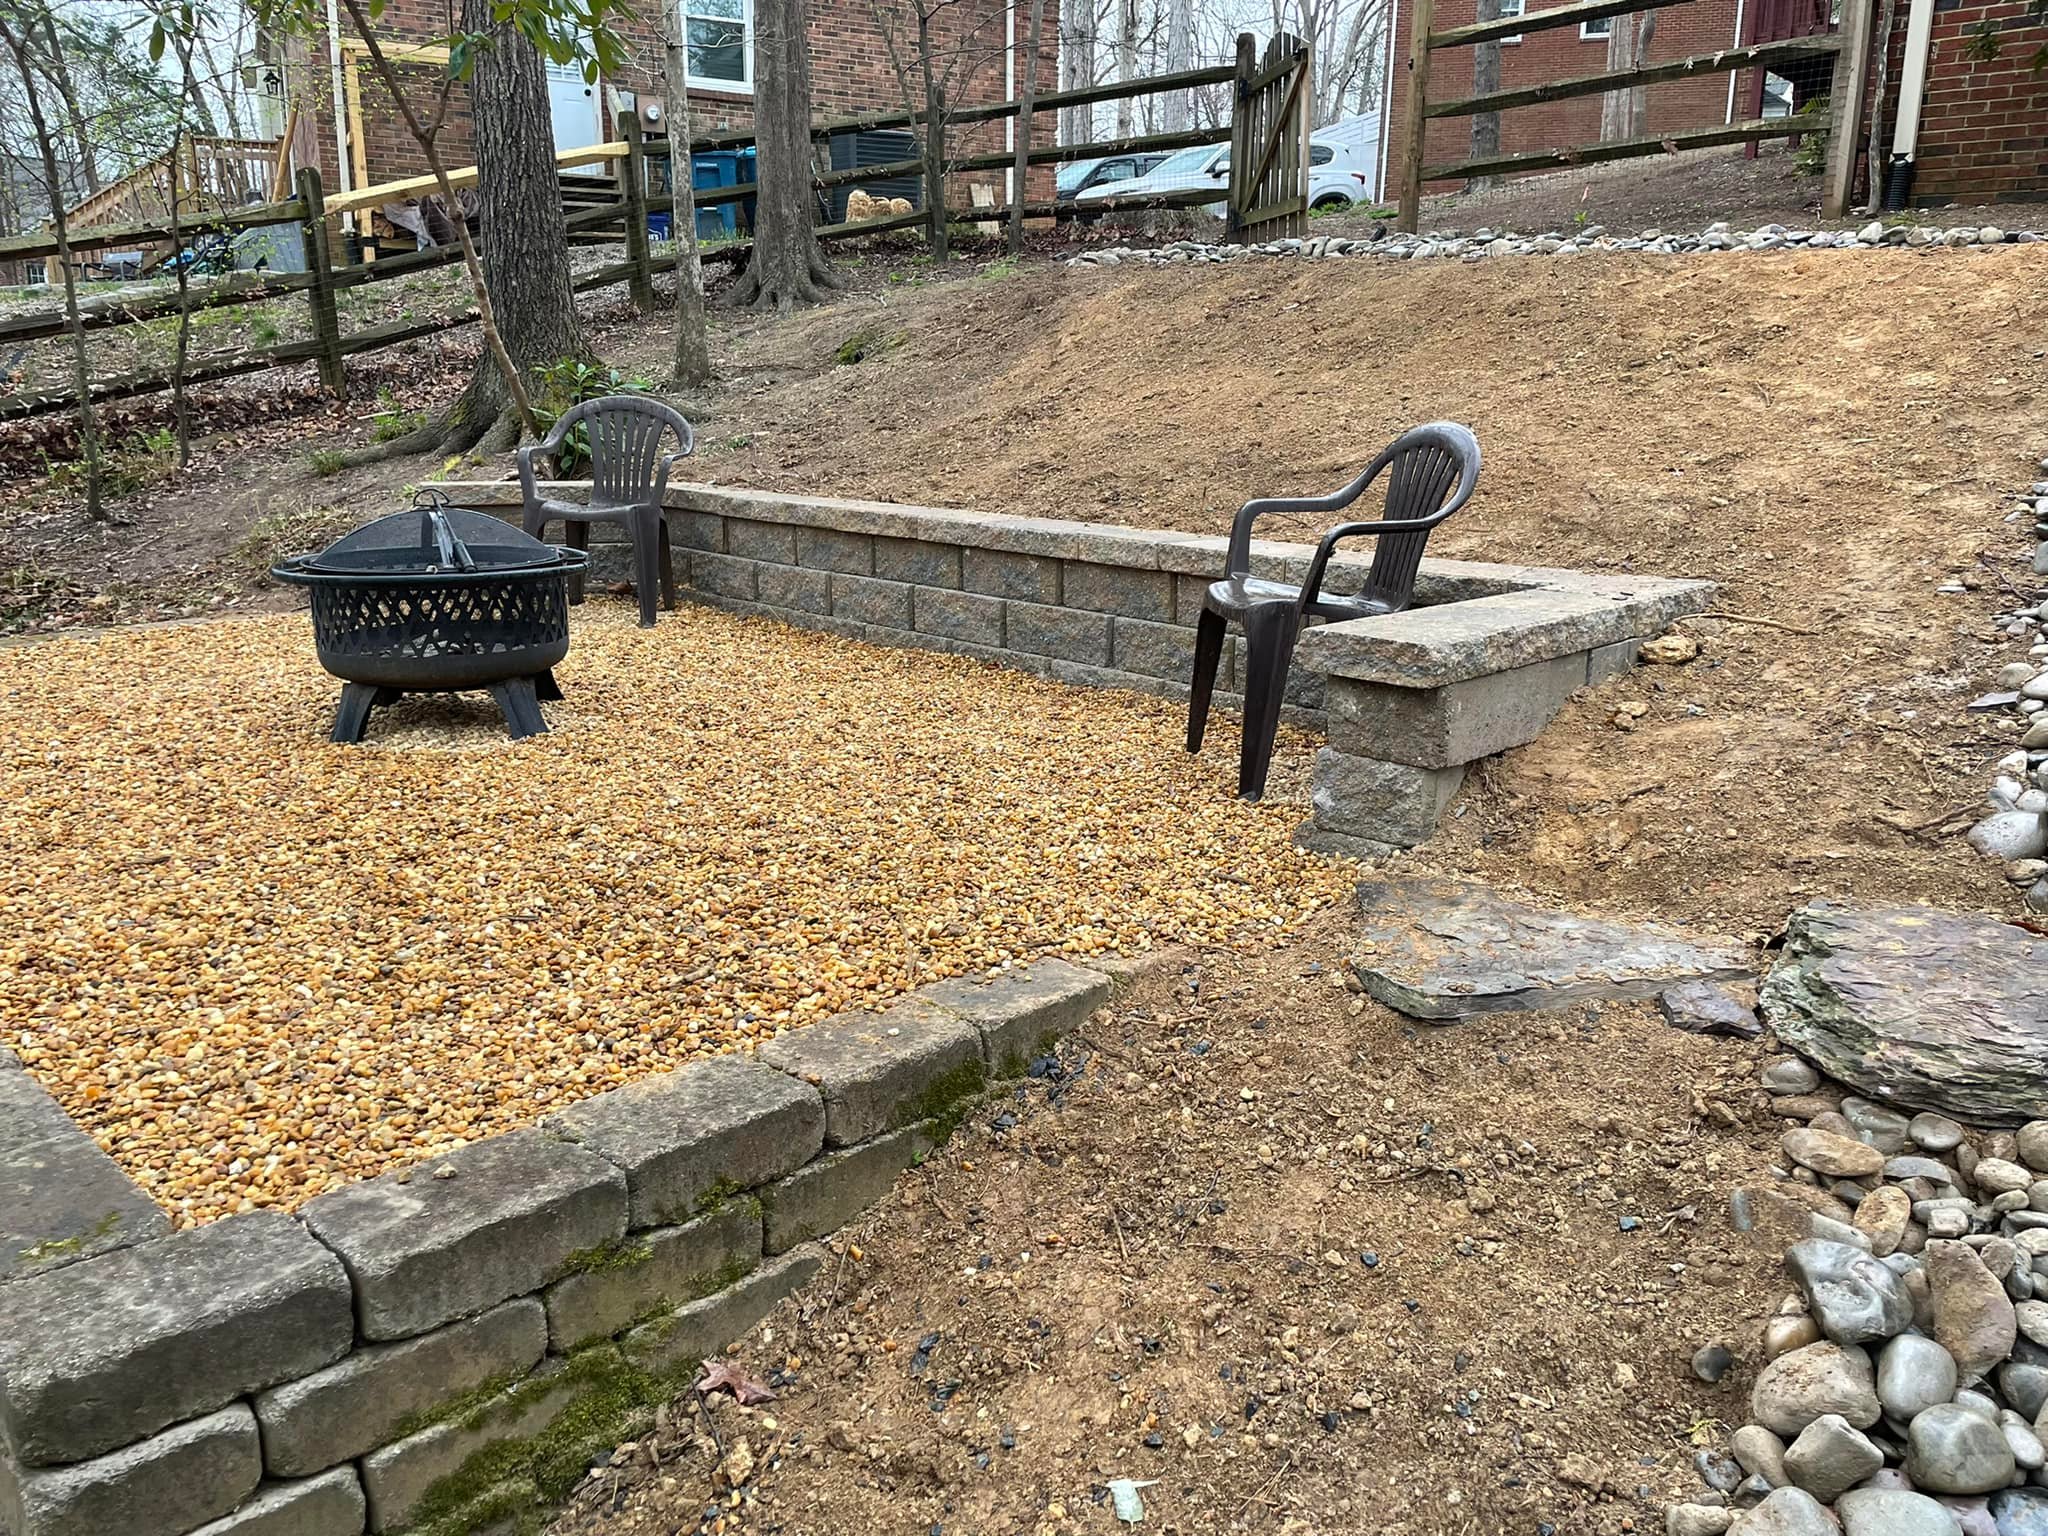 Retaining Wall – Outdoor Living Tip of the Day